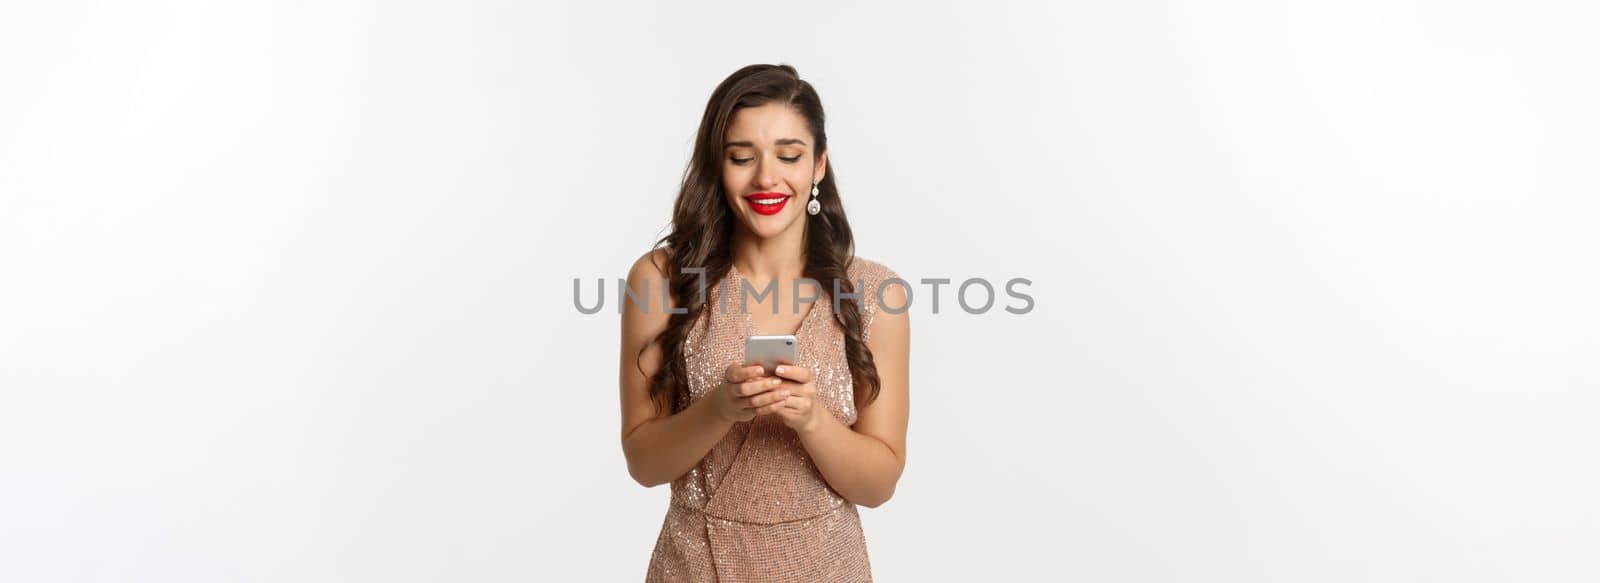 Christmas party and celebration concept. Beautiful woman in glamour dress reading text message on phone and smiling, using smartphone, standing over white background.